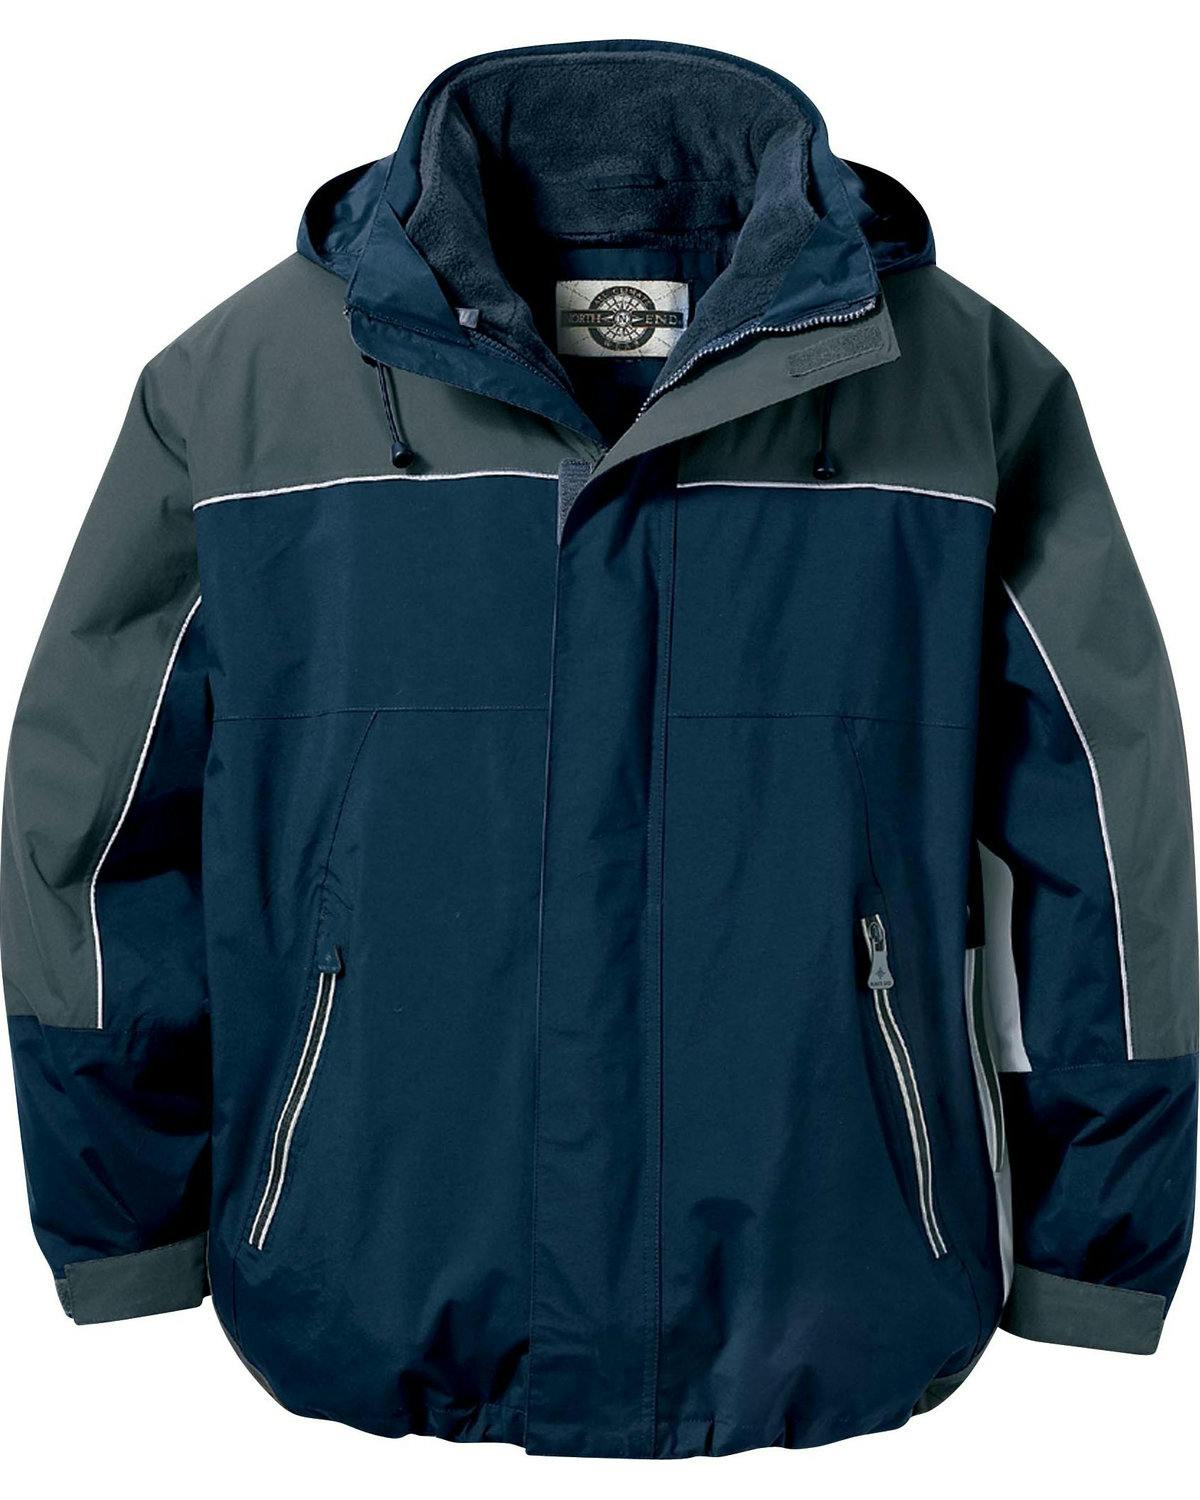 Image for Adult 3-in-1 Seam-Sealed Mid-Length Jacket with Piping